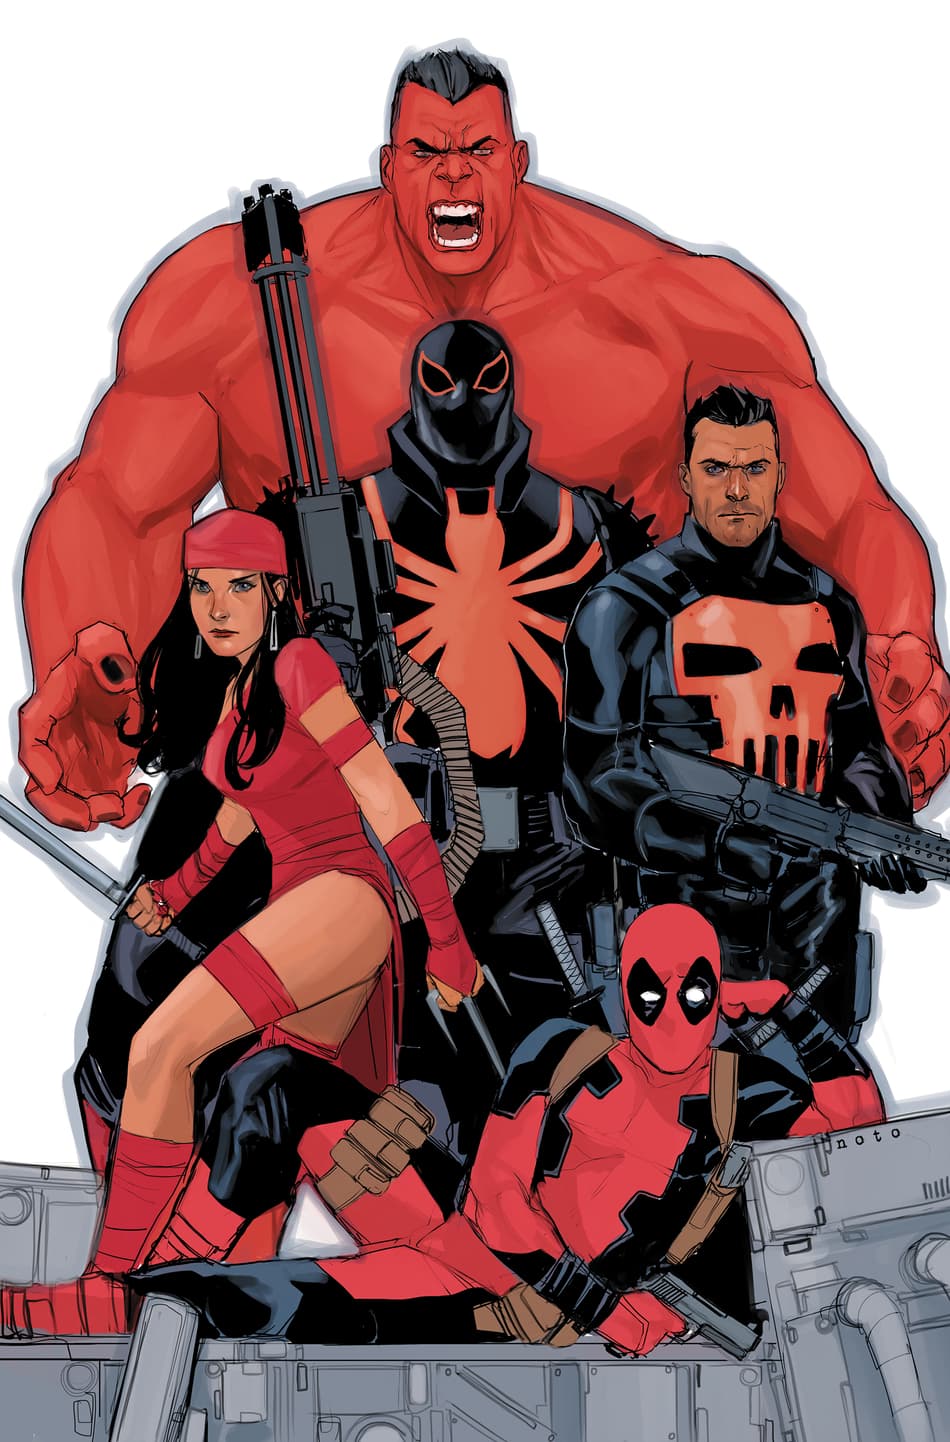 Variant cover to THUNDERBOLTS (2012) #7 by Phil Noto.